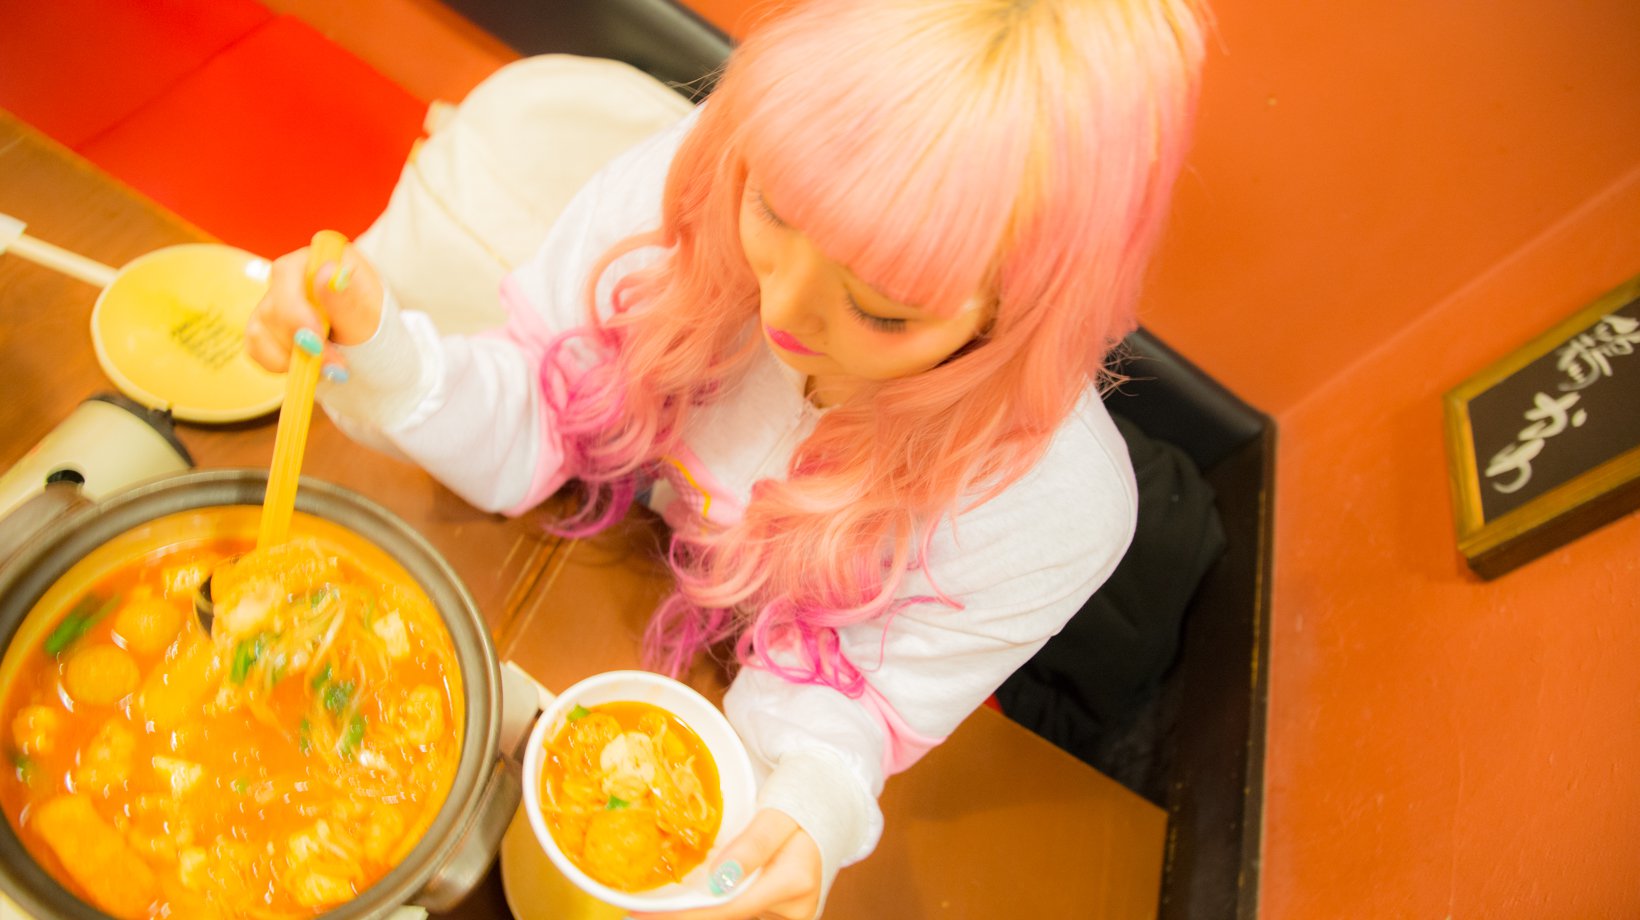 The Go-to Restaurant for the Youth of Shibuya! Tokyo Rad Girls Marianchu Tells Us of How Food Should be Eaten at ‘Akakara’